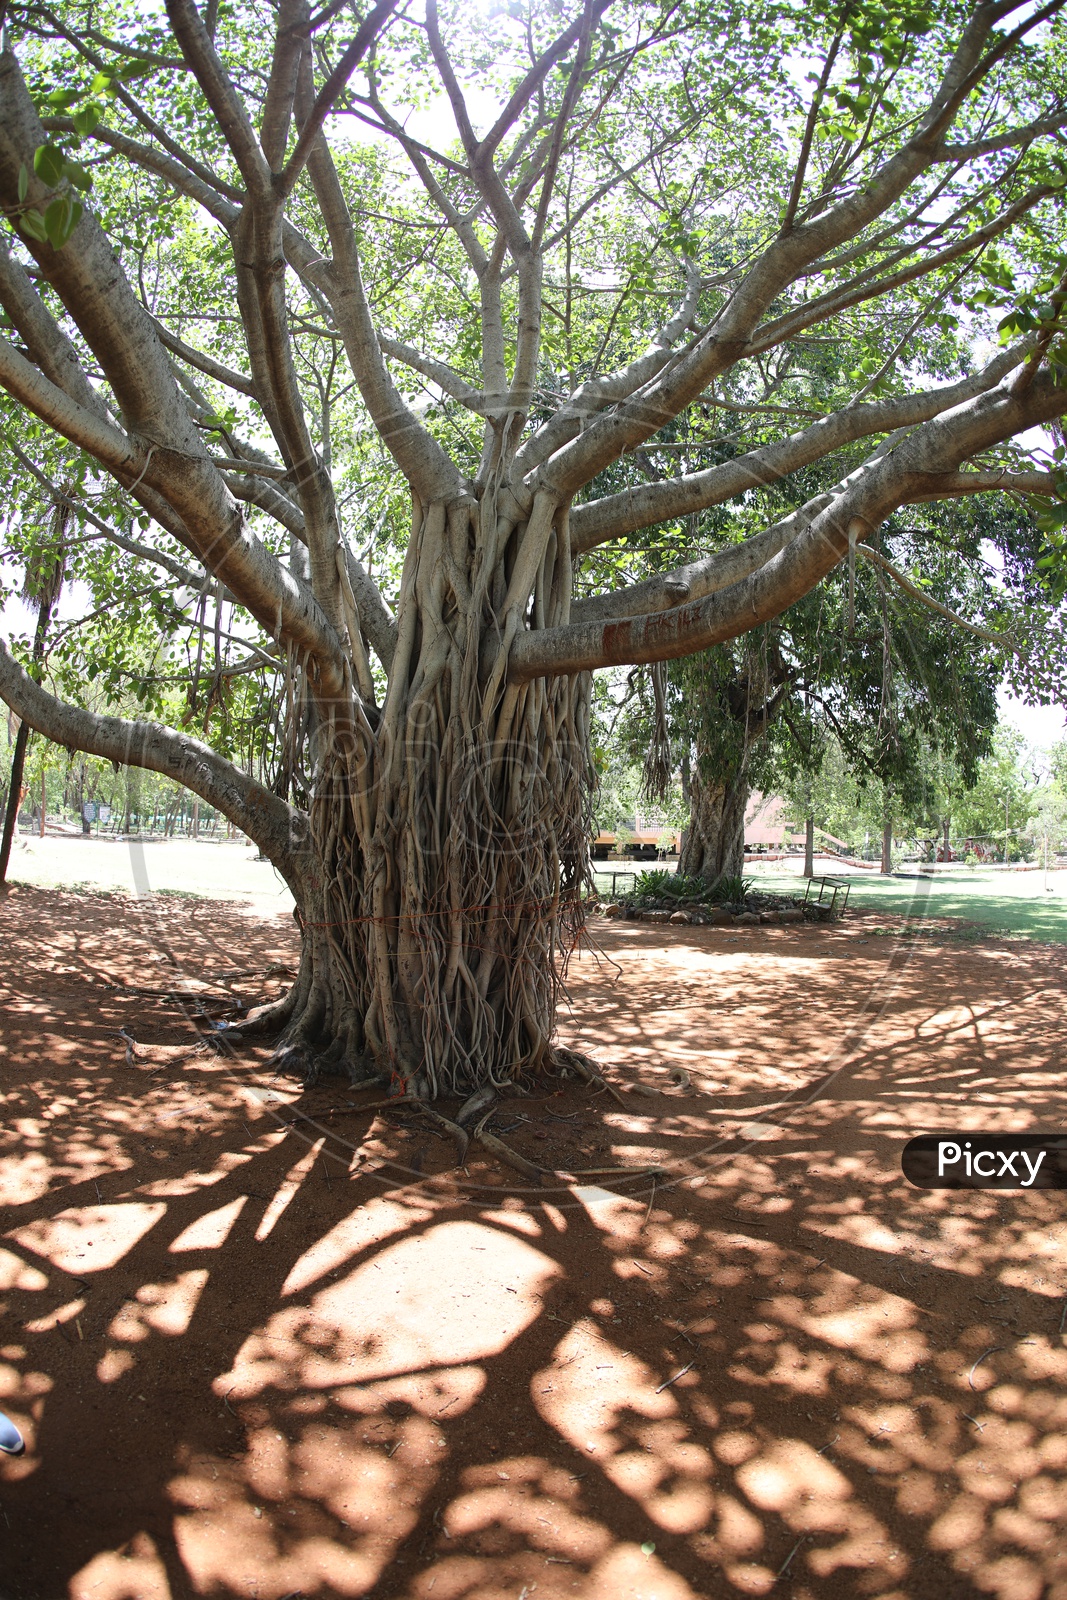 Banyan Tree And Its Roots In a Park